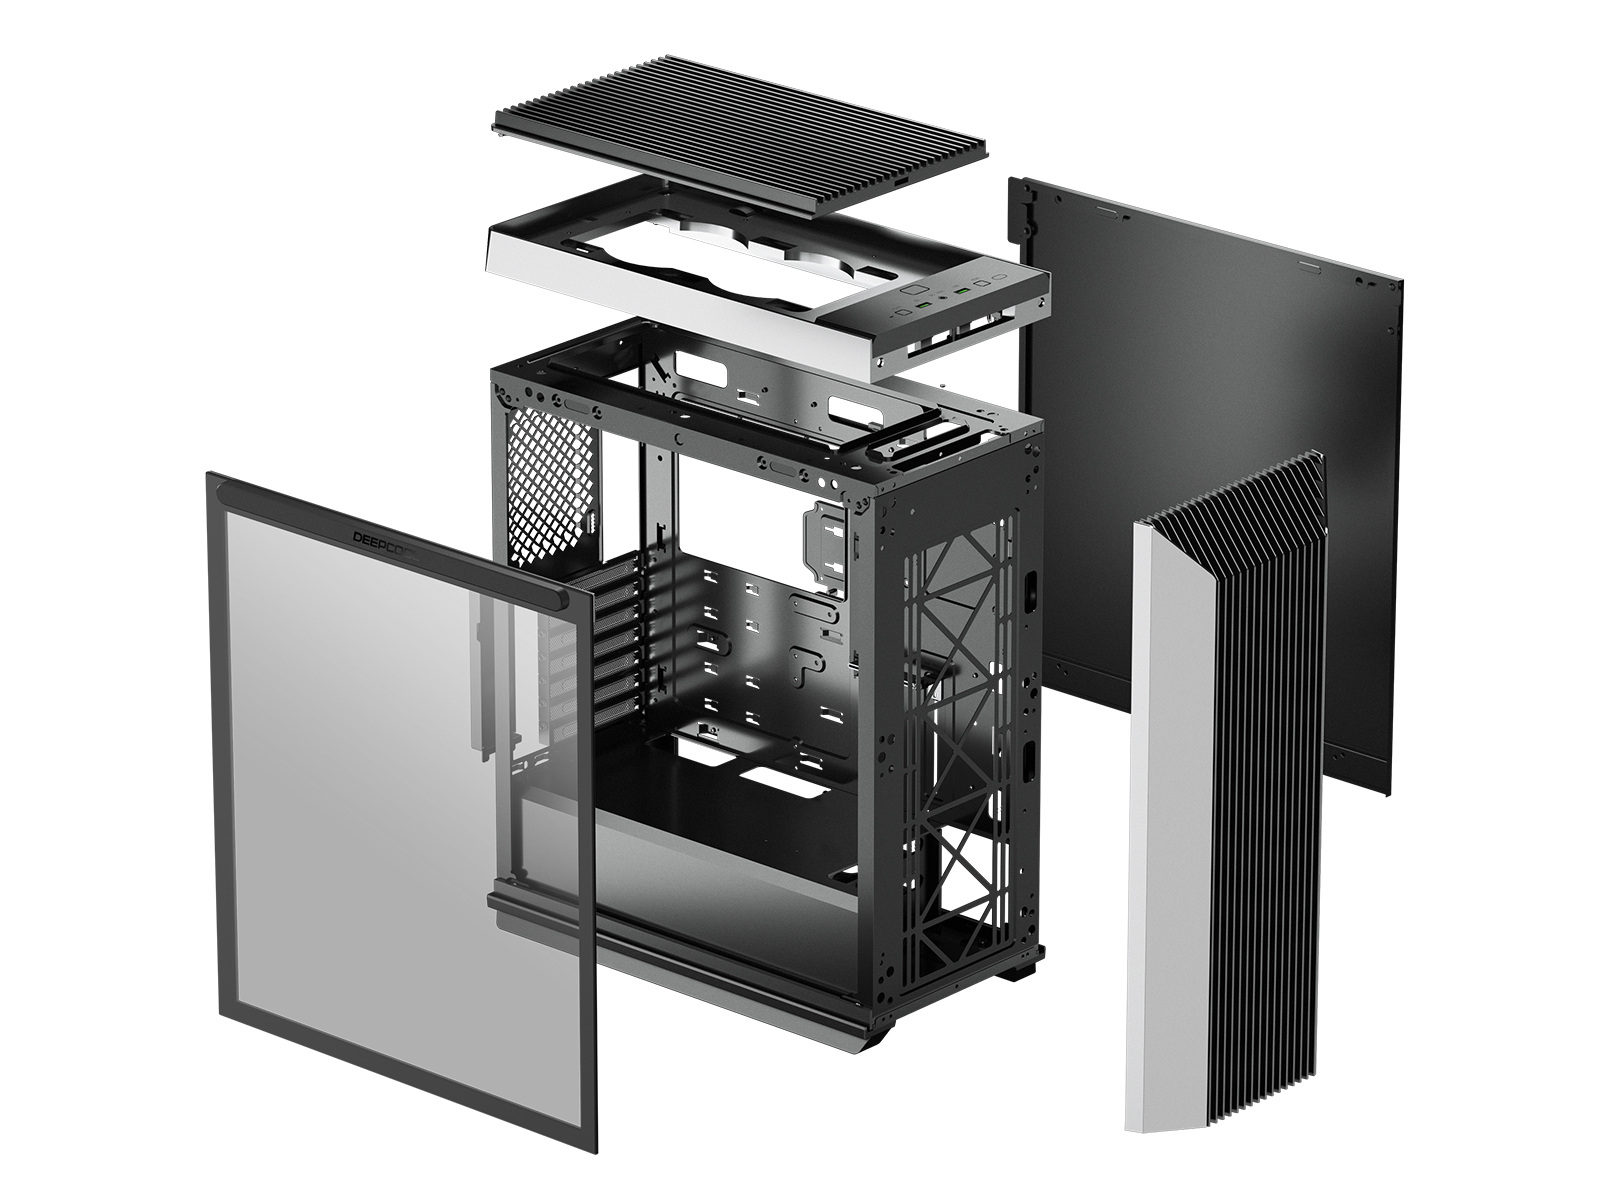 DeepCool Releases Brand New CL500 High Airflow Case